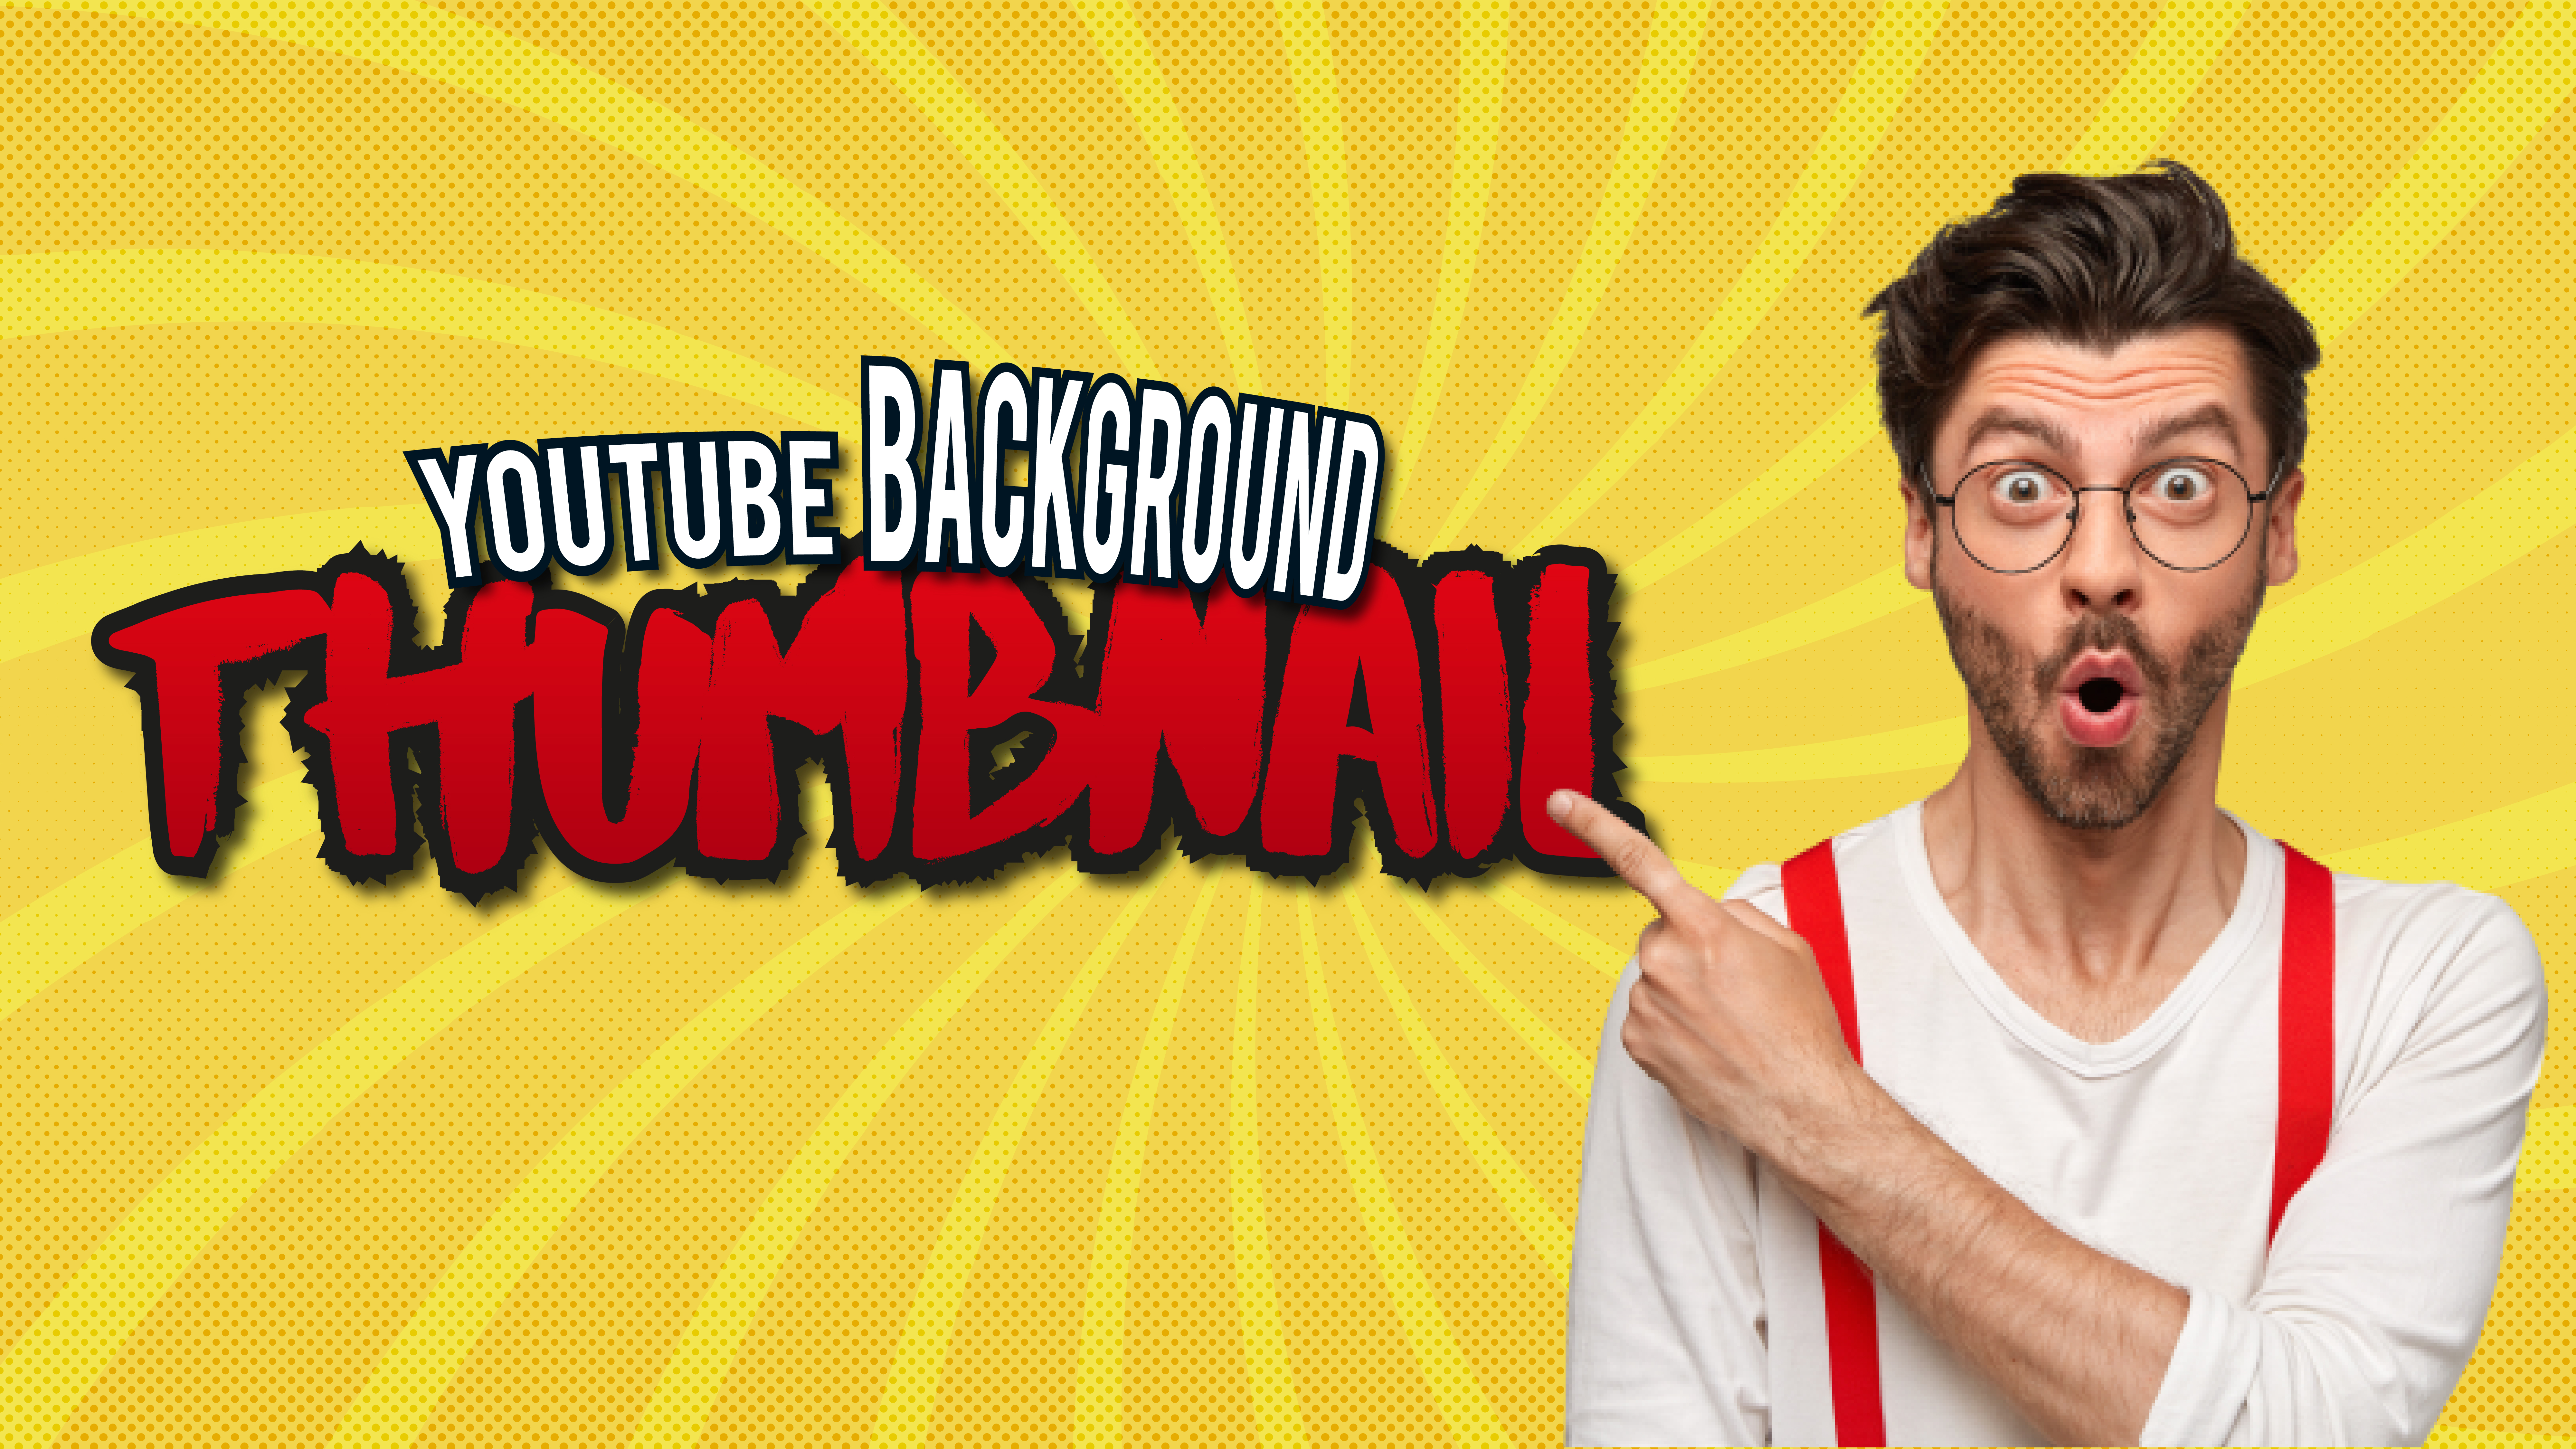 I will design amazing youtube thumbnail/banner in 2hr